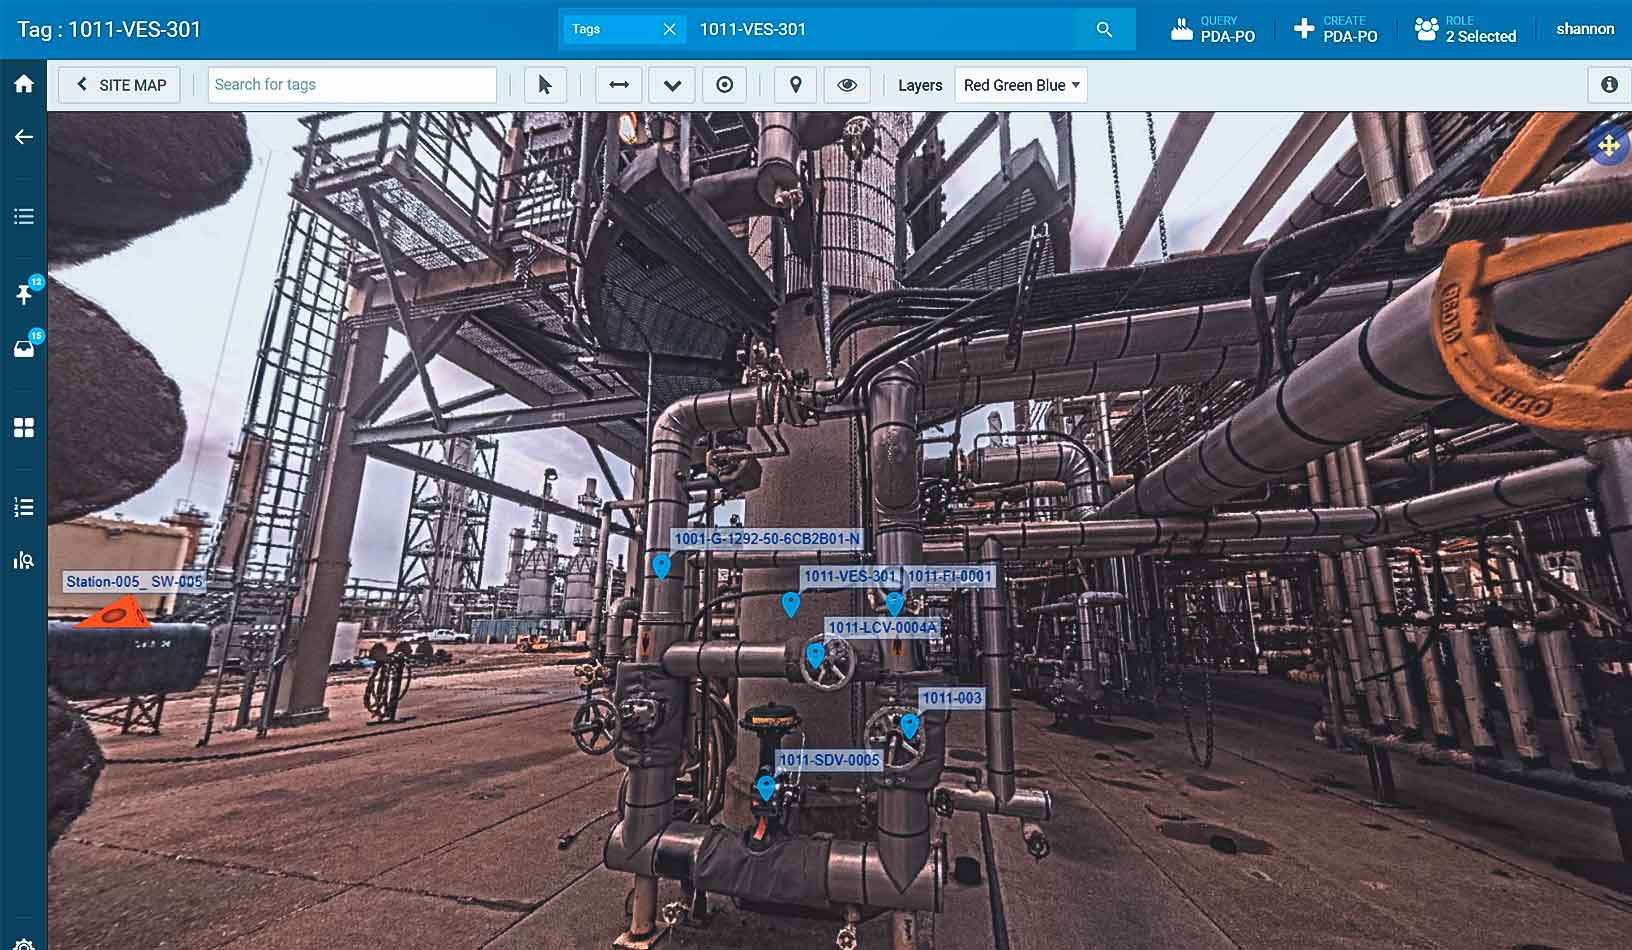 Hexagon solutions enable a digital thread that connects concept and FEED, detail design, construction, operations, maintenance and reliability information throughout the asset lifecycle.